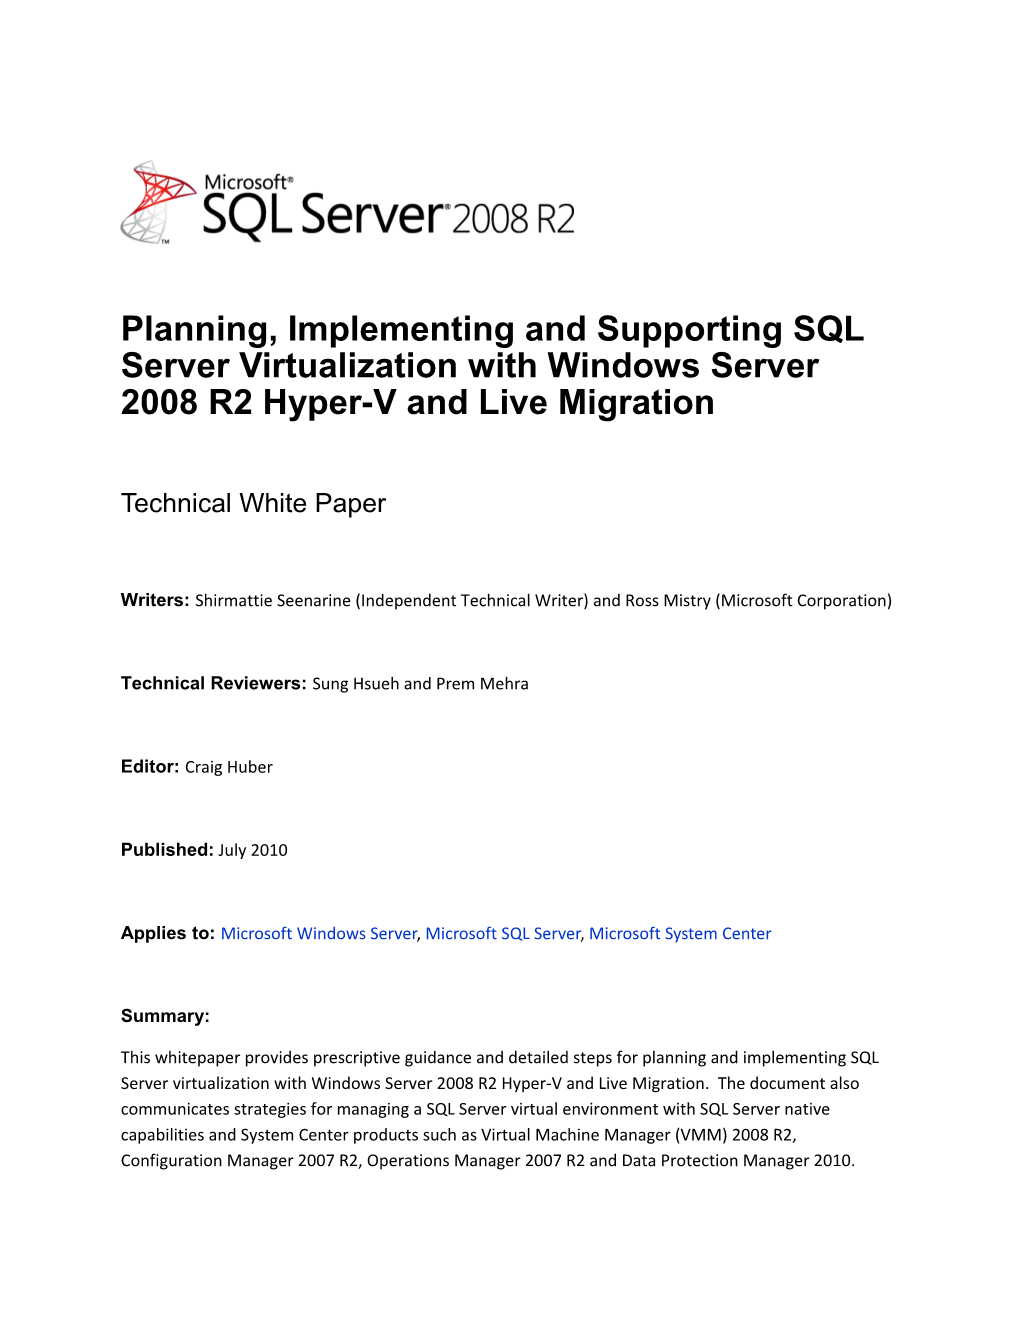 Planning, Implementing and Supporting SQL Server Virtualization with Windows Server 2008